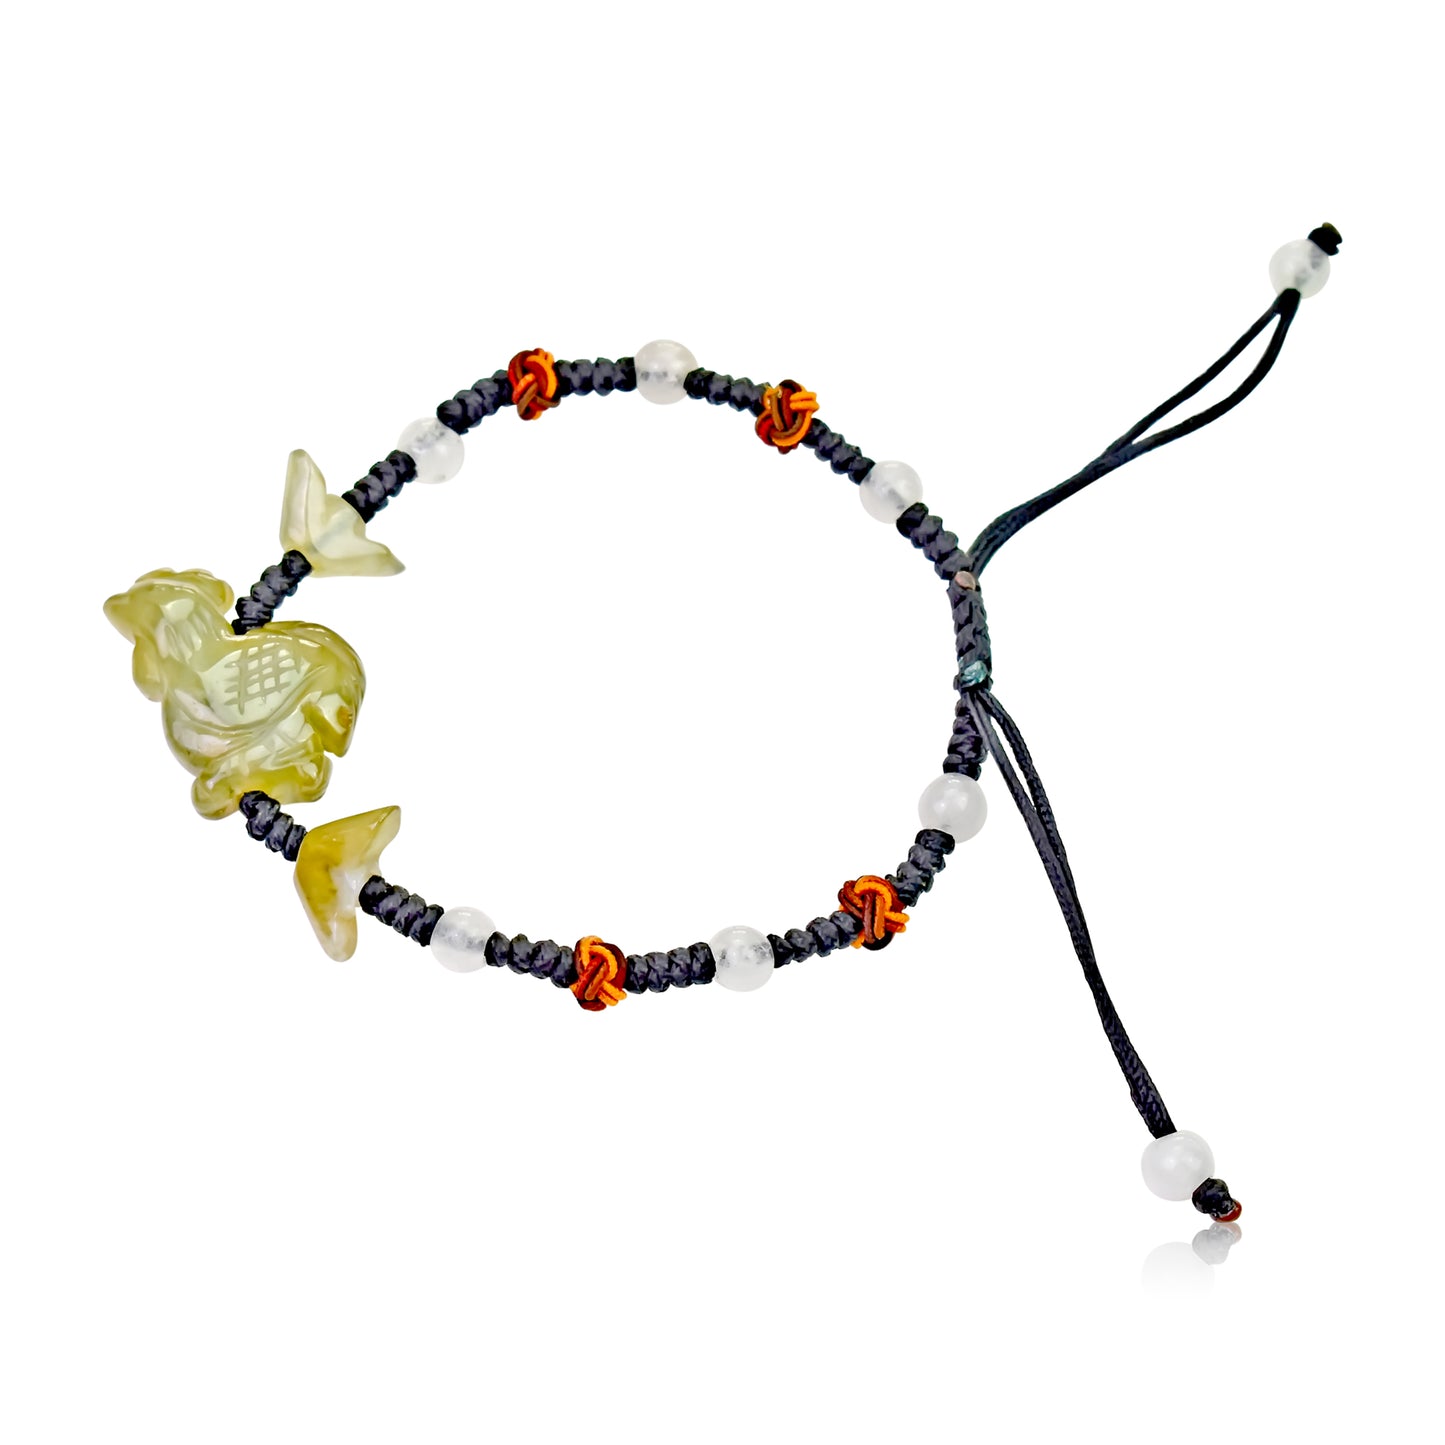 A Unique Gift: Rooster Chinese Zodiac Handmade Jade Bracelet made with Black Cord